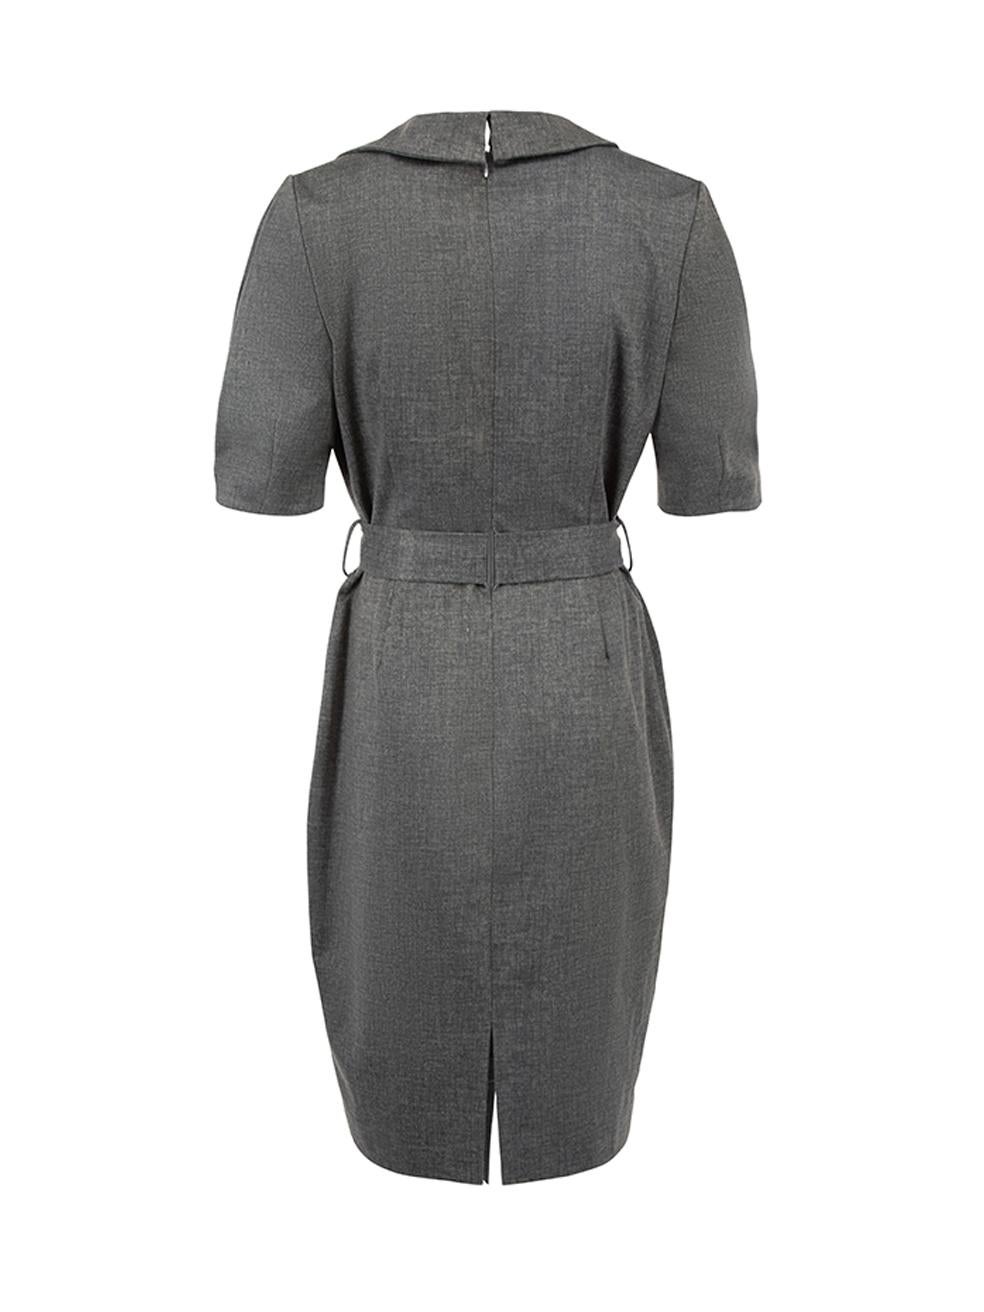 Badgley Mischka Women's Grey Collared Wrap Front Dress In Good Condition For Sale In London, GB